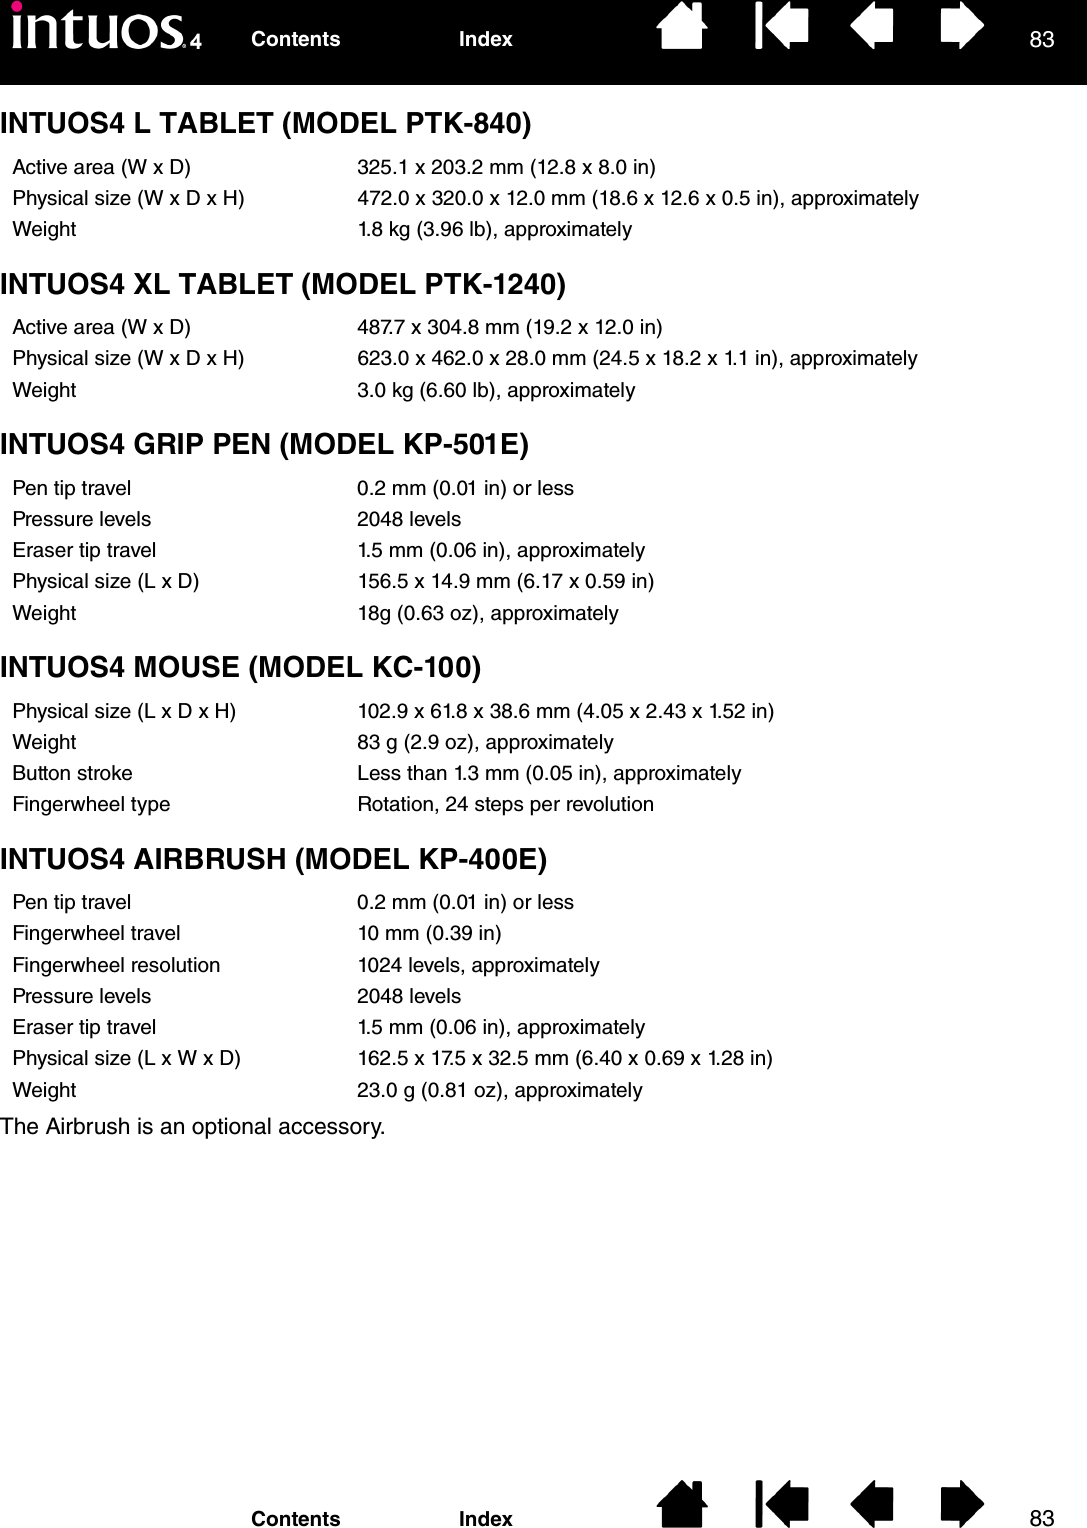 8383IndexContentsIndexContentsINTUOS4 L TABLET (MODEL PTK-840)INTUOS4 XL TABLET (MODEL PTK-1240)INTUOS4 GRIP PEN (MODEL KP-501E)INTUOS4 MOUSE (MODEL KC-100)INTUOS4 AIRBRUSH (MODEL KP-400E)The Airbrush is an optional accessory.Active area (W x D) 325.1 x 203.2 mm (12.8 x 8.0 in)Physical size (W x D x H) 472.0 x 320.0 x 12.0 mm (18.6 x 12.6 x 0.5 in), approximatelyWeight 1.8 kg (3.96 lb), approximatelyActive area (W x D) 487.7 x 304.8 mm (19.2 x 12.0 in)Physical size (W x D x H) 623.0 x 462.0 x 28.0 mm (24.5 x 18.2 x 1.1 in), approximatelyWeight 3.0 kg (6.60 lb), approximatelyPen tip travel 0.2 mm (0.01 in) or lessPressure levels 2048 levelsEraser tip travel 1.5 mm (0.06 in), approximatelyPhysical size (L x D) 156.5 x 14.9 mm (6.17 x 0.59 in)Weight 18g (0.63 oz), approximatelyPhysical size (L x D x H) 102.9 x 61.8 x 38.6 mm (4.05 x 2.43 x 1.52 in)Weight 83 g (2.9 oz), approximatelyButton stroke Less than 1.3 mm (0.05 in), approximatelyFingerwheel type Rotation, 24 steps per revolutionPen tip travel 0.2 mm (0.01 in) or lessFingerwheel travel 10 mm (0.39 in)Fingerwheel resolution 1024 levels, approximatelyPressure levels 2048 levelsEraser tip travel 1.5 mm (0.06 in), approximatelyPhysical size (L x W x D) 162.5 x 17.5 x 32.5 mm (6.40 x 0.69 x 1.28 in)Weight 23.0 g (0.81 oz), approximately